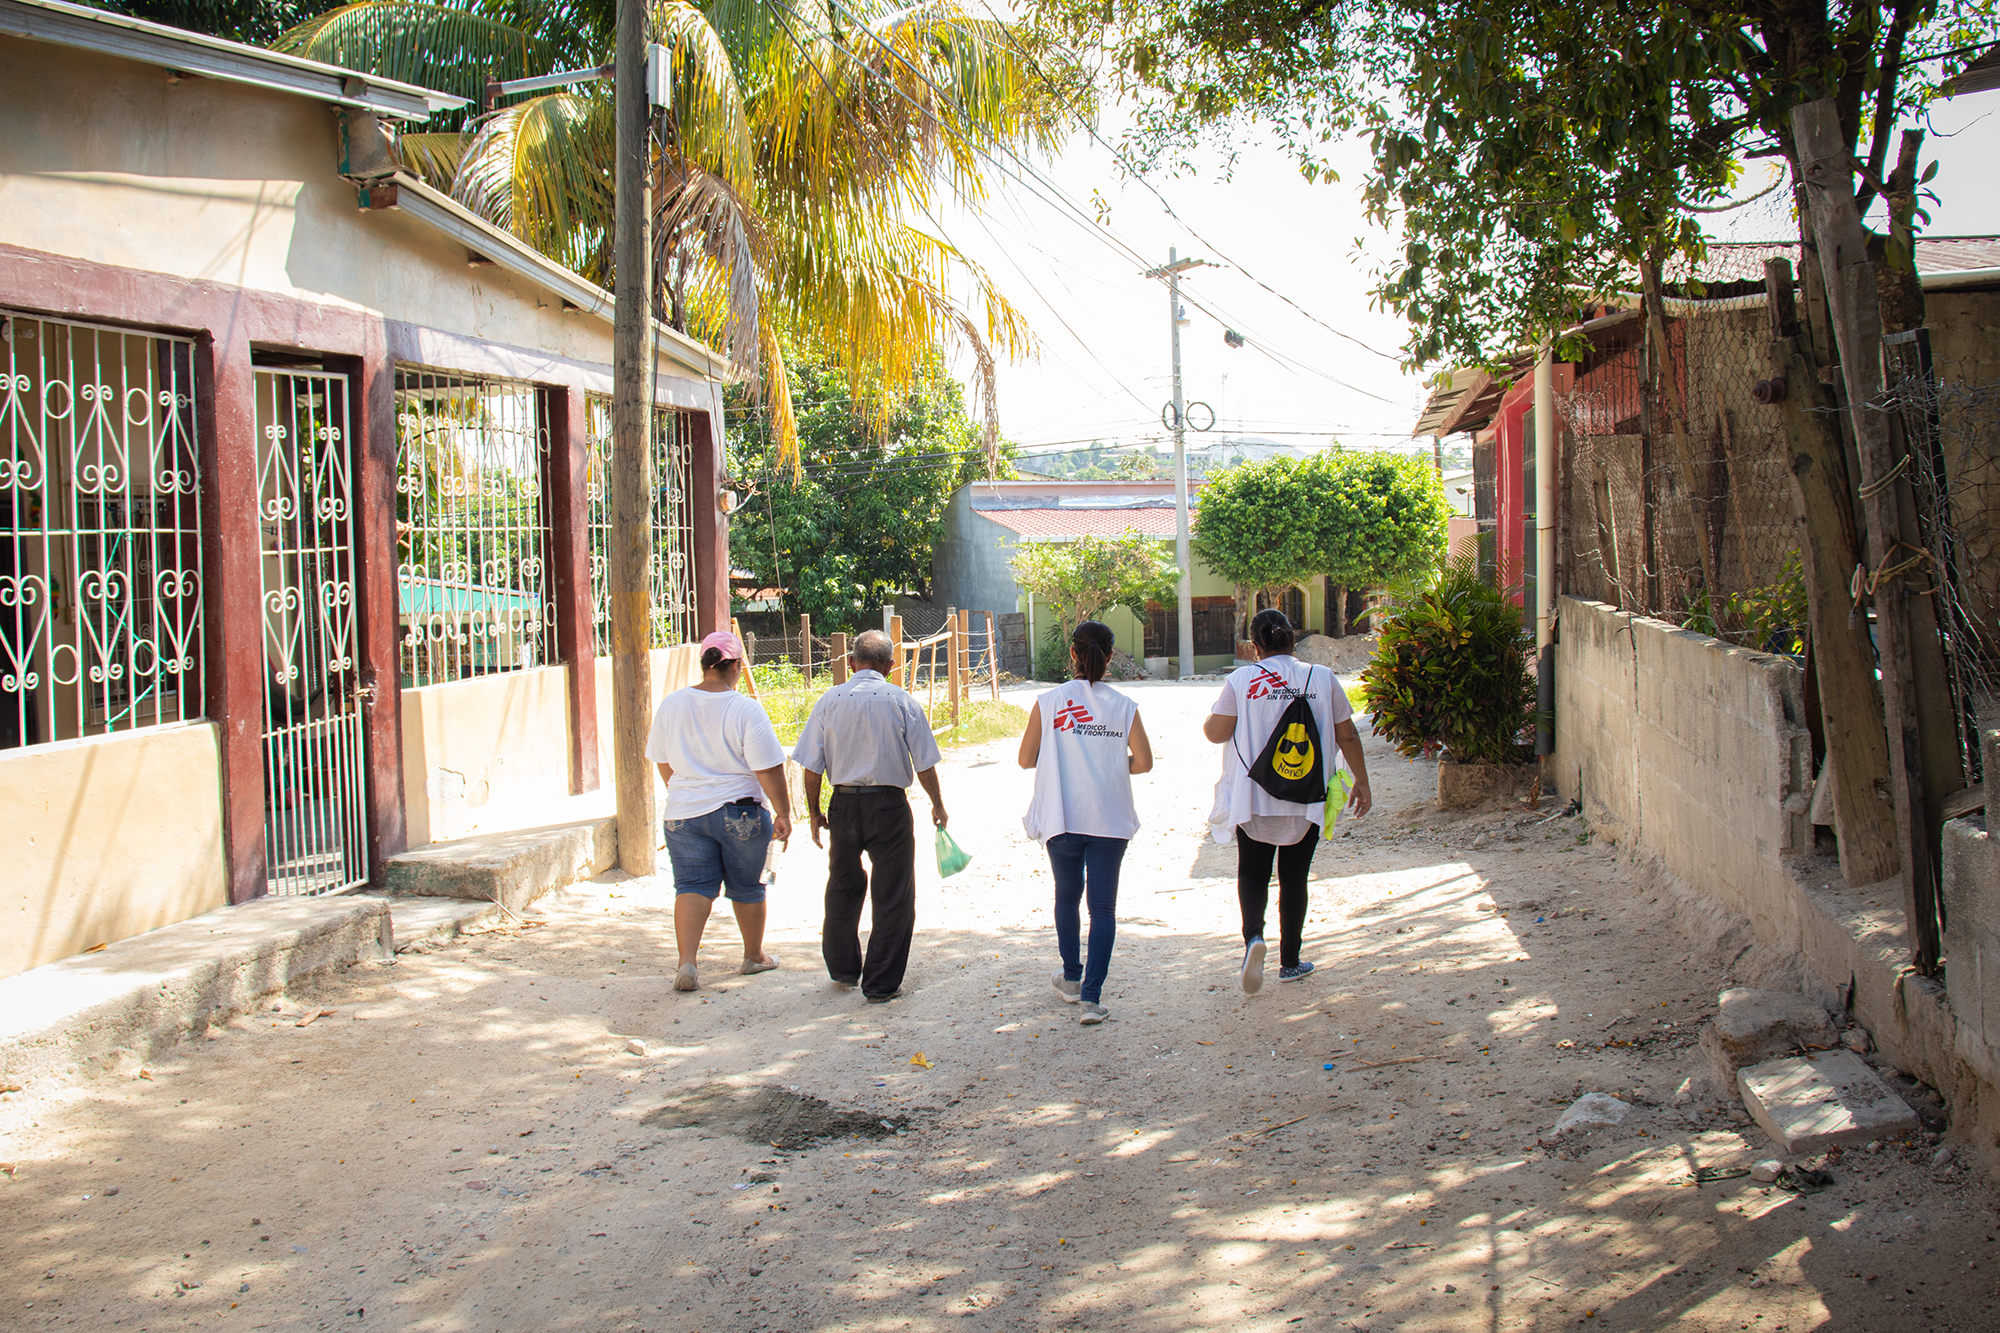 A community leader and an MSF health promotion team go from house to house in Cortes, Honduras to talk about dengue and apply larvicide. © Arlette Blanco/MSF